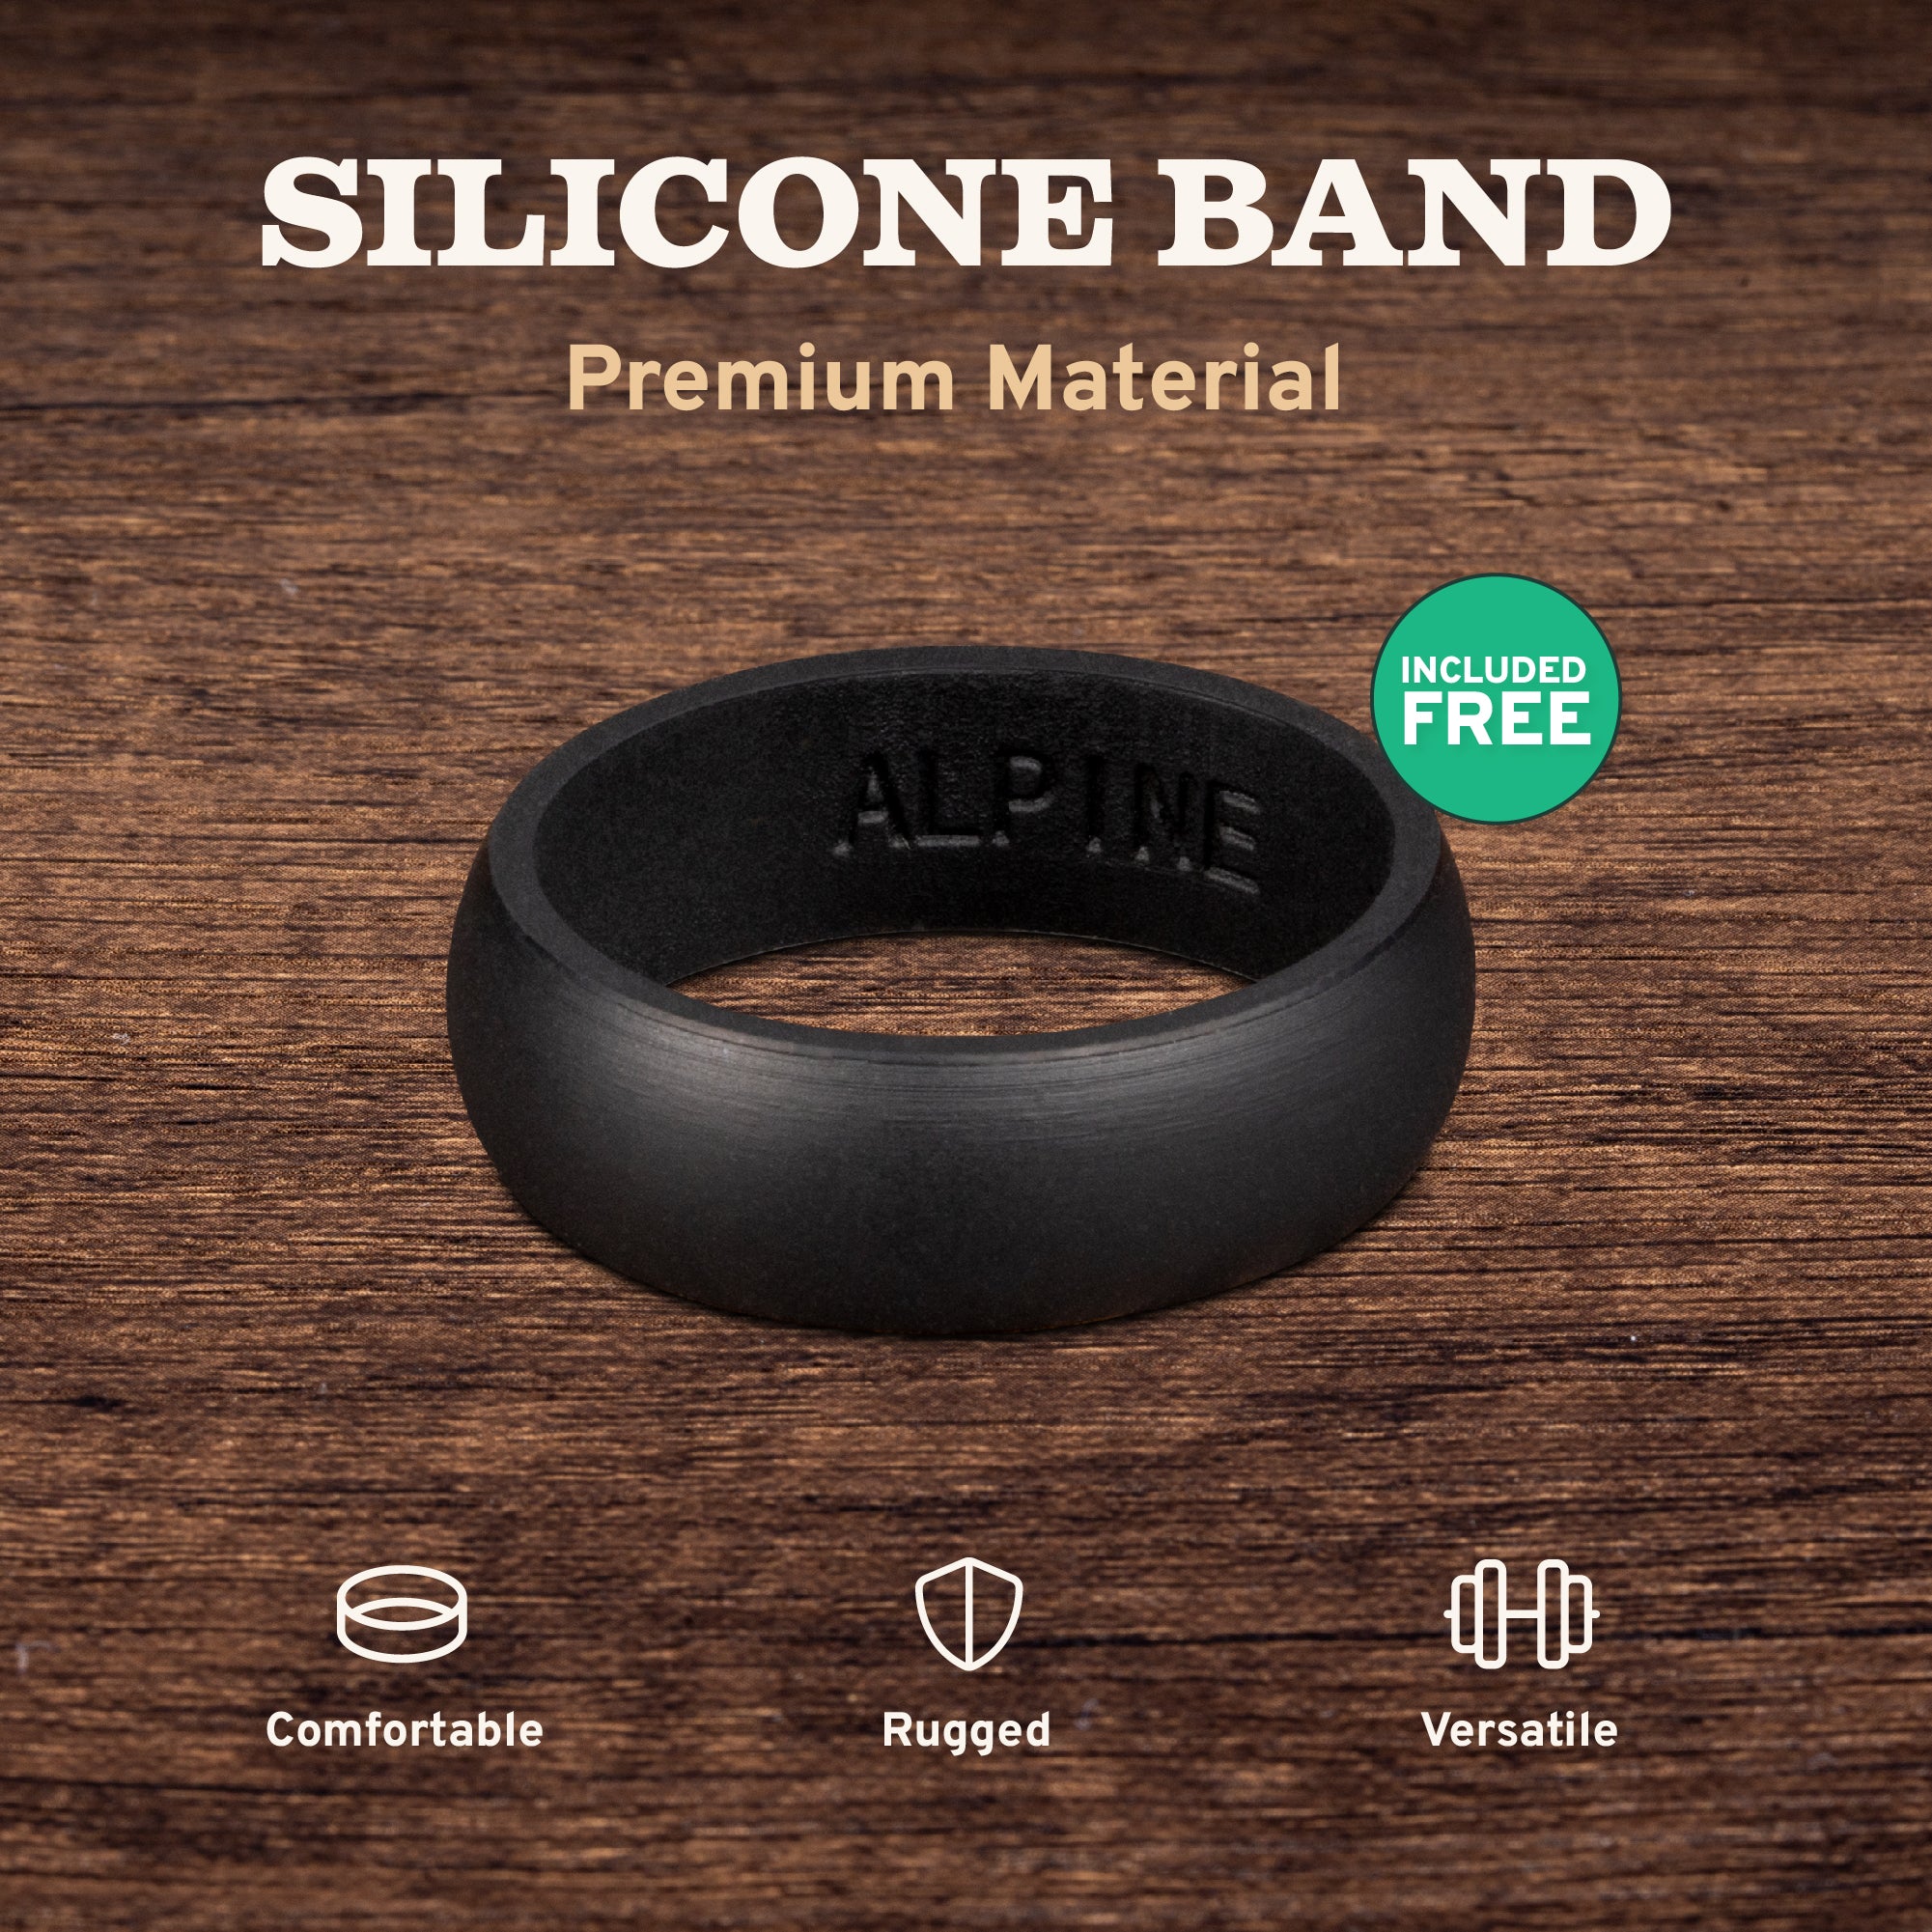 Black Tungsten Wedding Band With Beveled Edges And Pear Wood 6MM